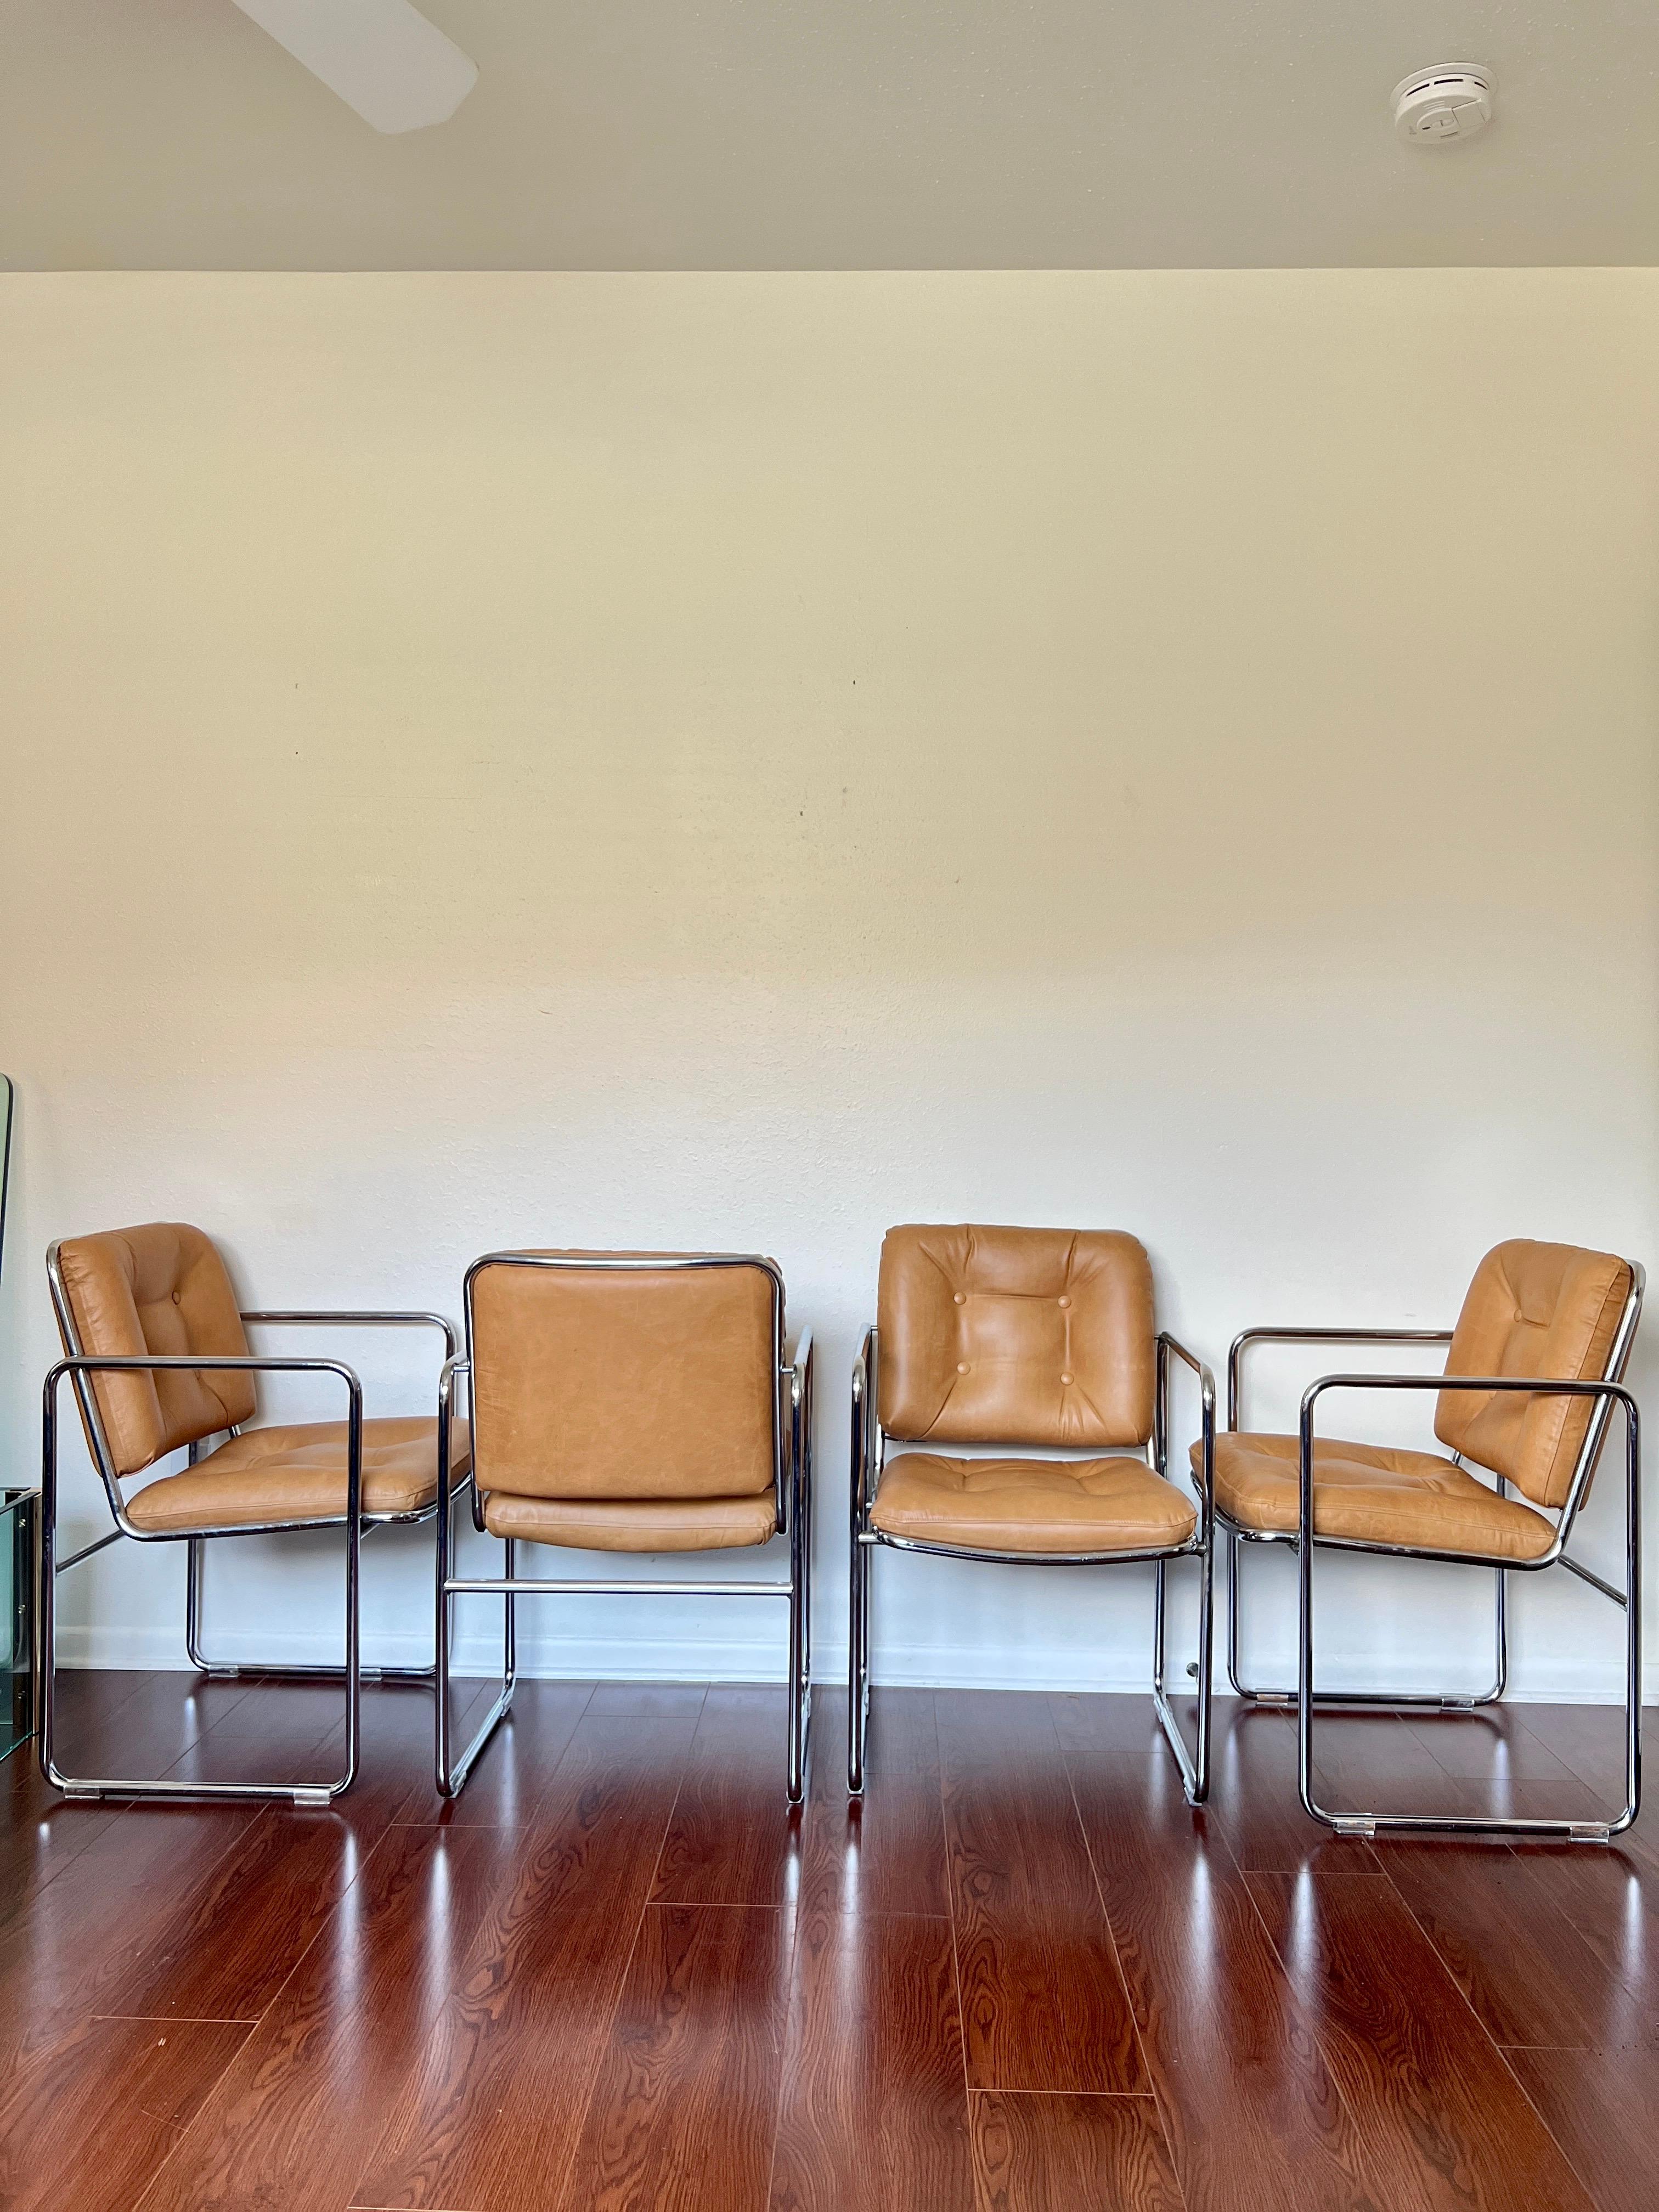 Unknown Vintage 1960s Mid-Century Modern Chrome Tubular Leather Tan Chairs by Chromcast